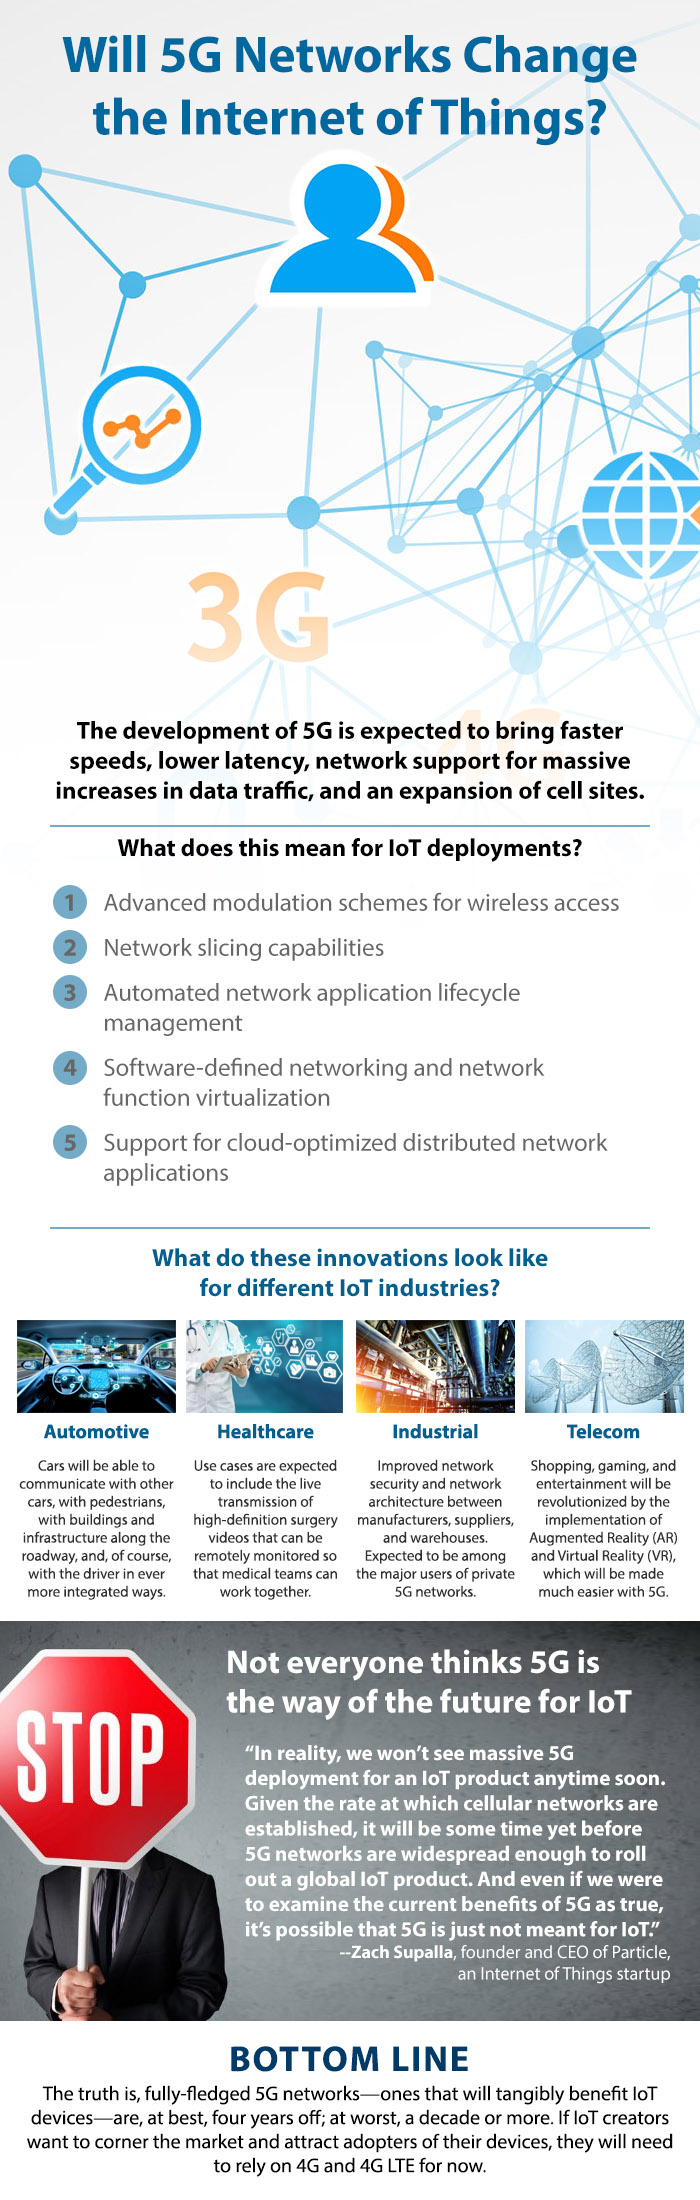 Will 5G Networks Change the Internet of Things - Infographic